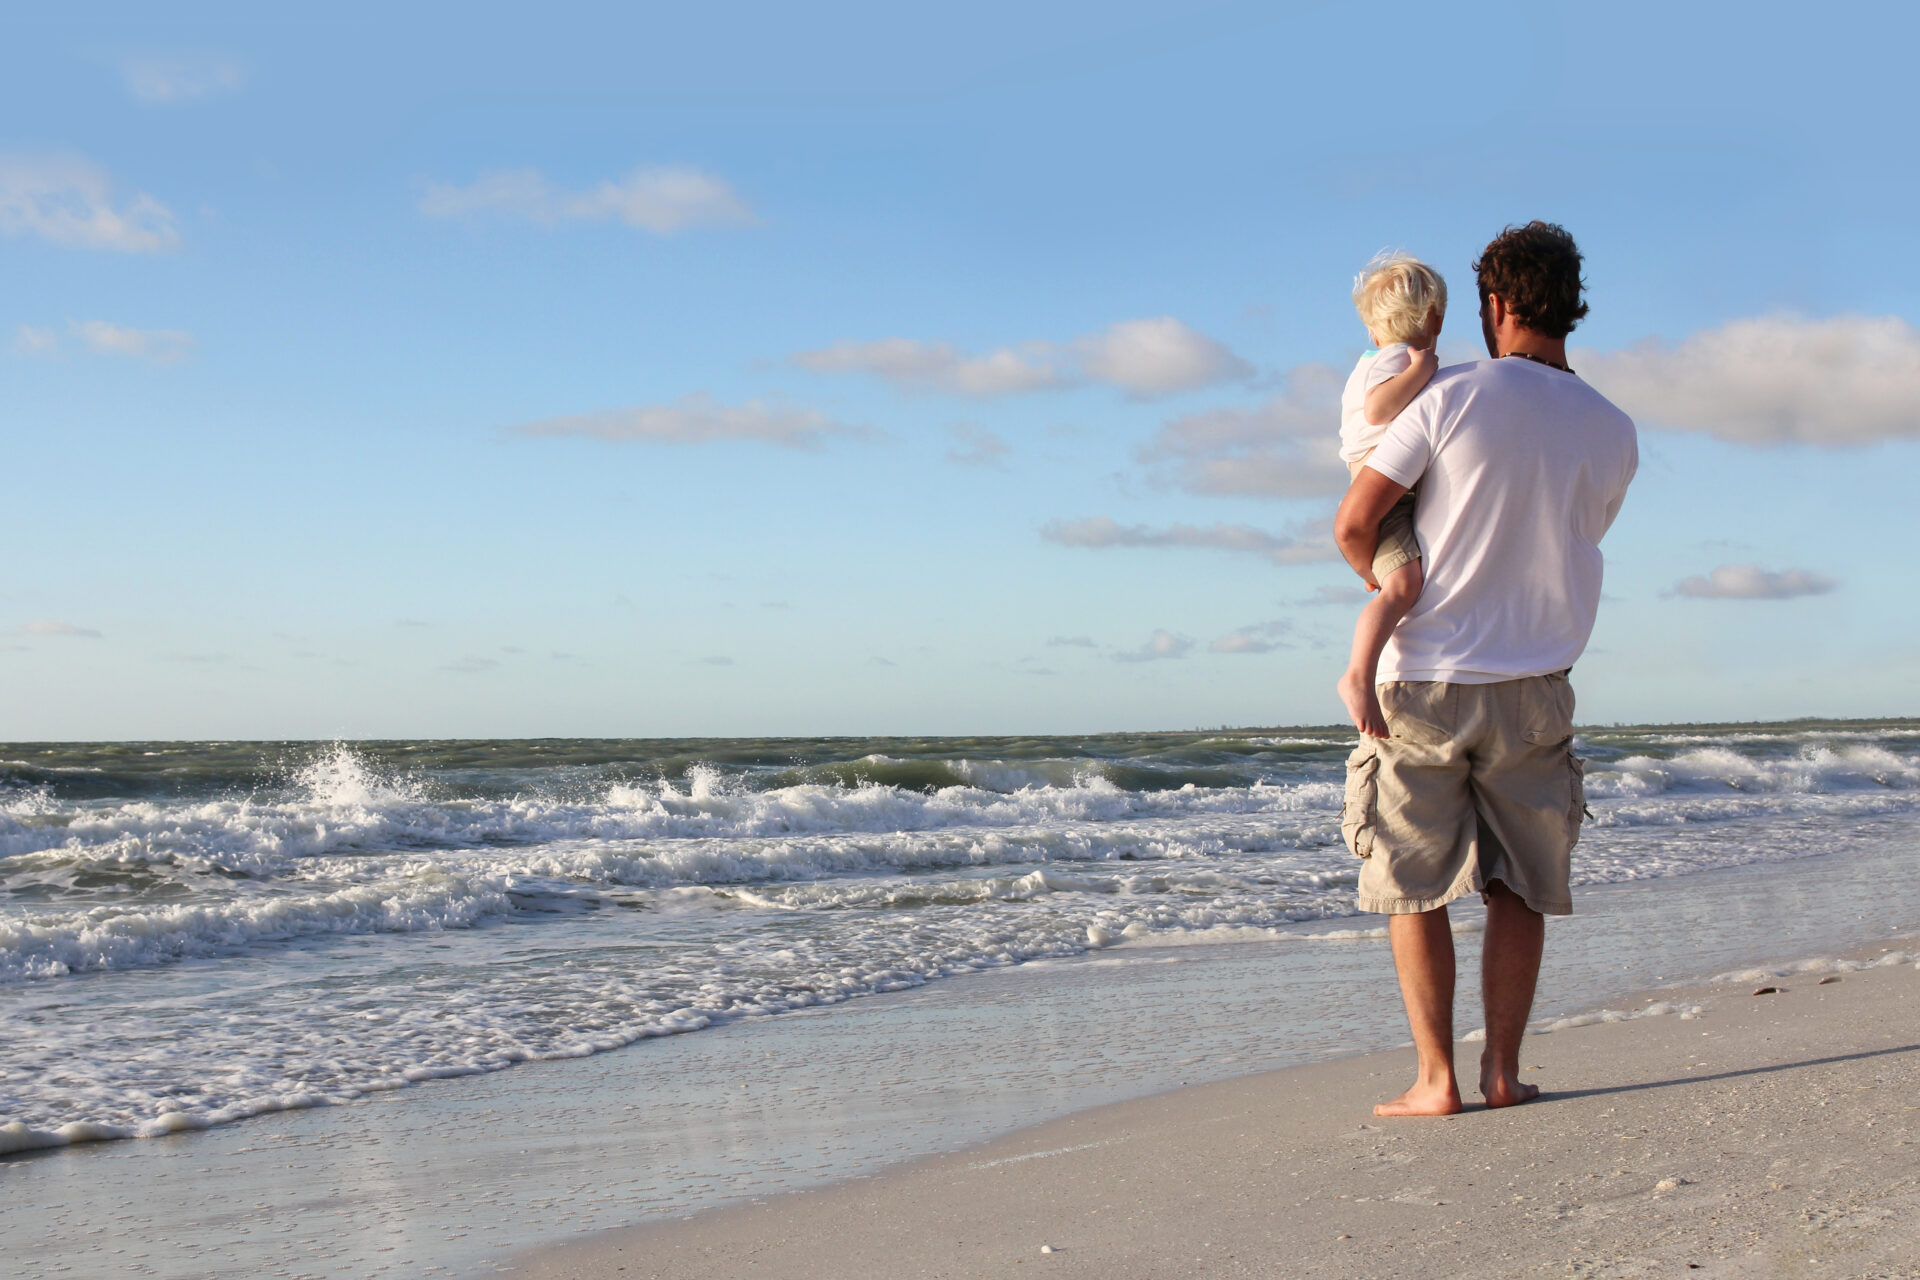 Father is holding his son in his arms during a walk on the white sand beach by the ocean. Father has recovered from a rotator cuff arthroscopy surgery.